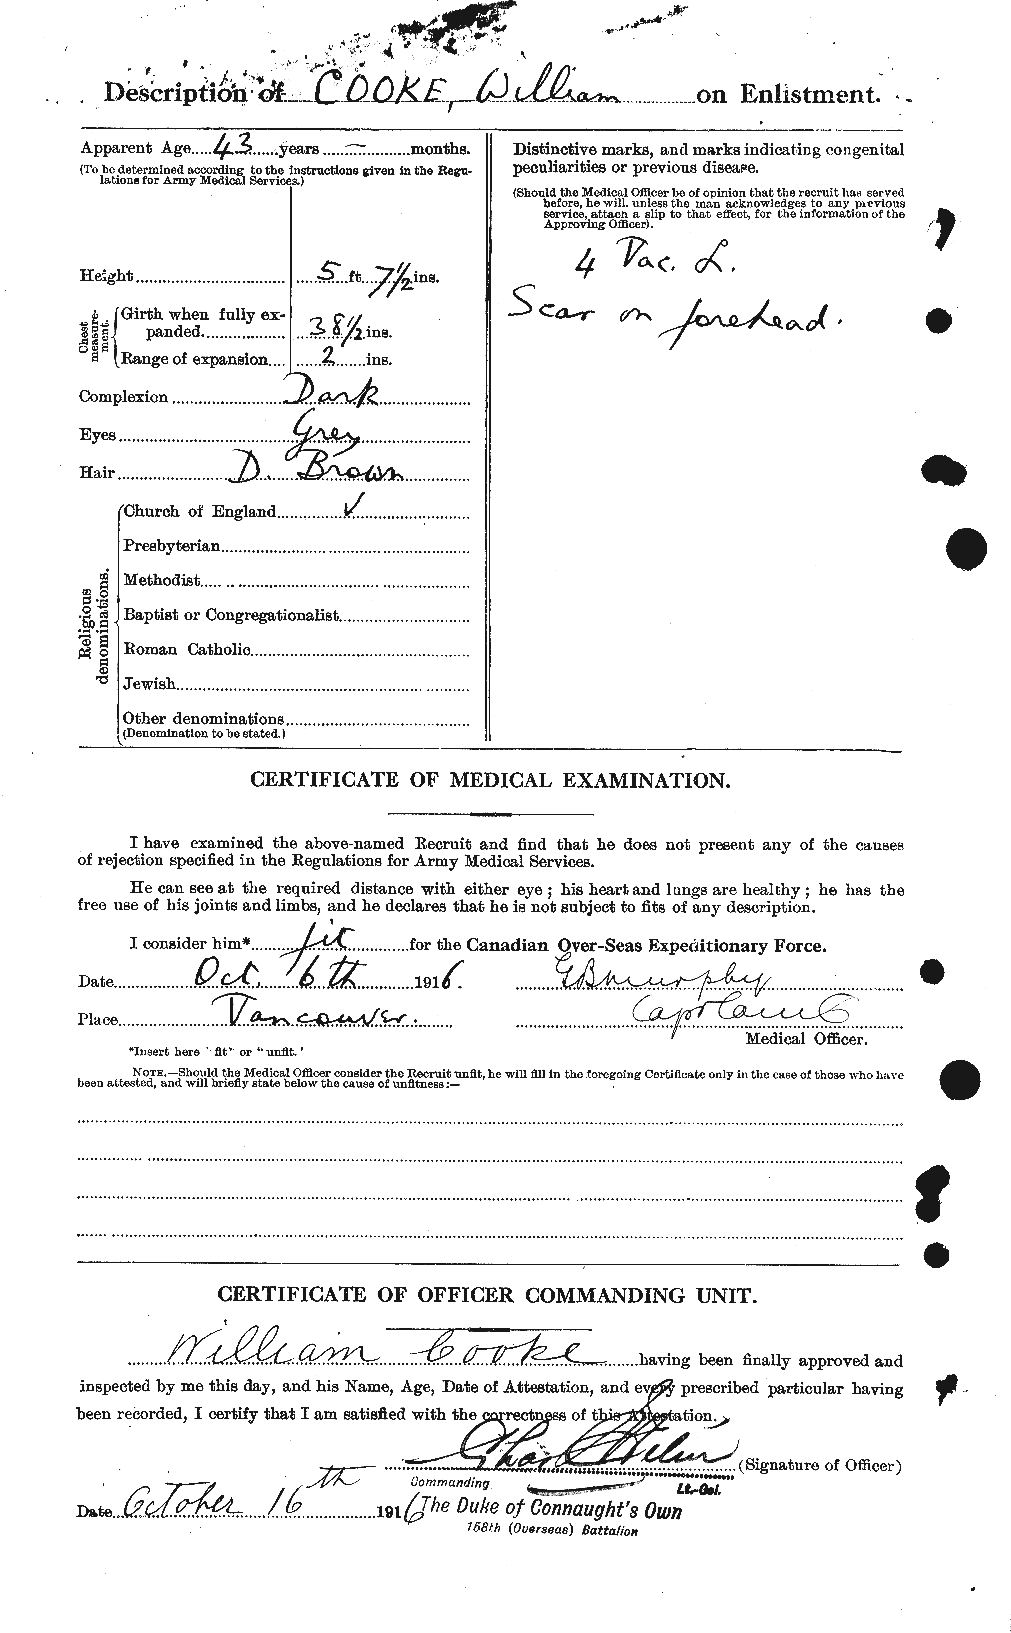 Personnel Records of the First World War - CEF 057037b